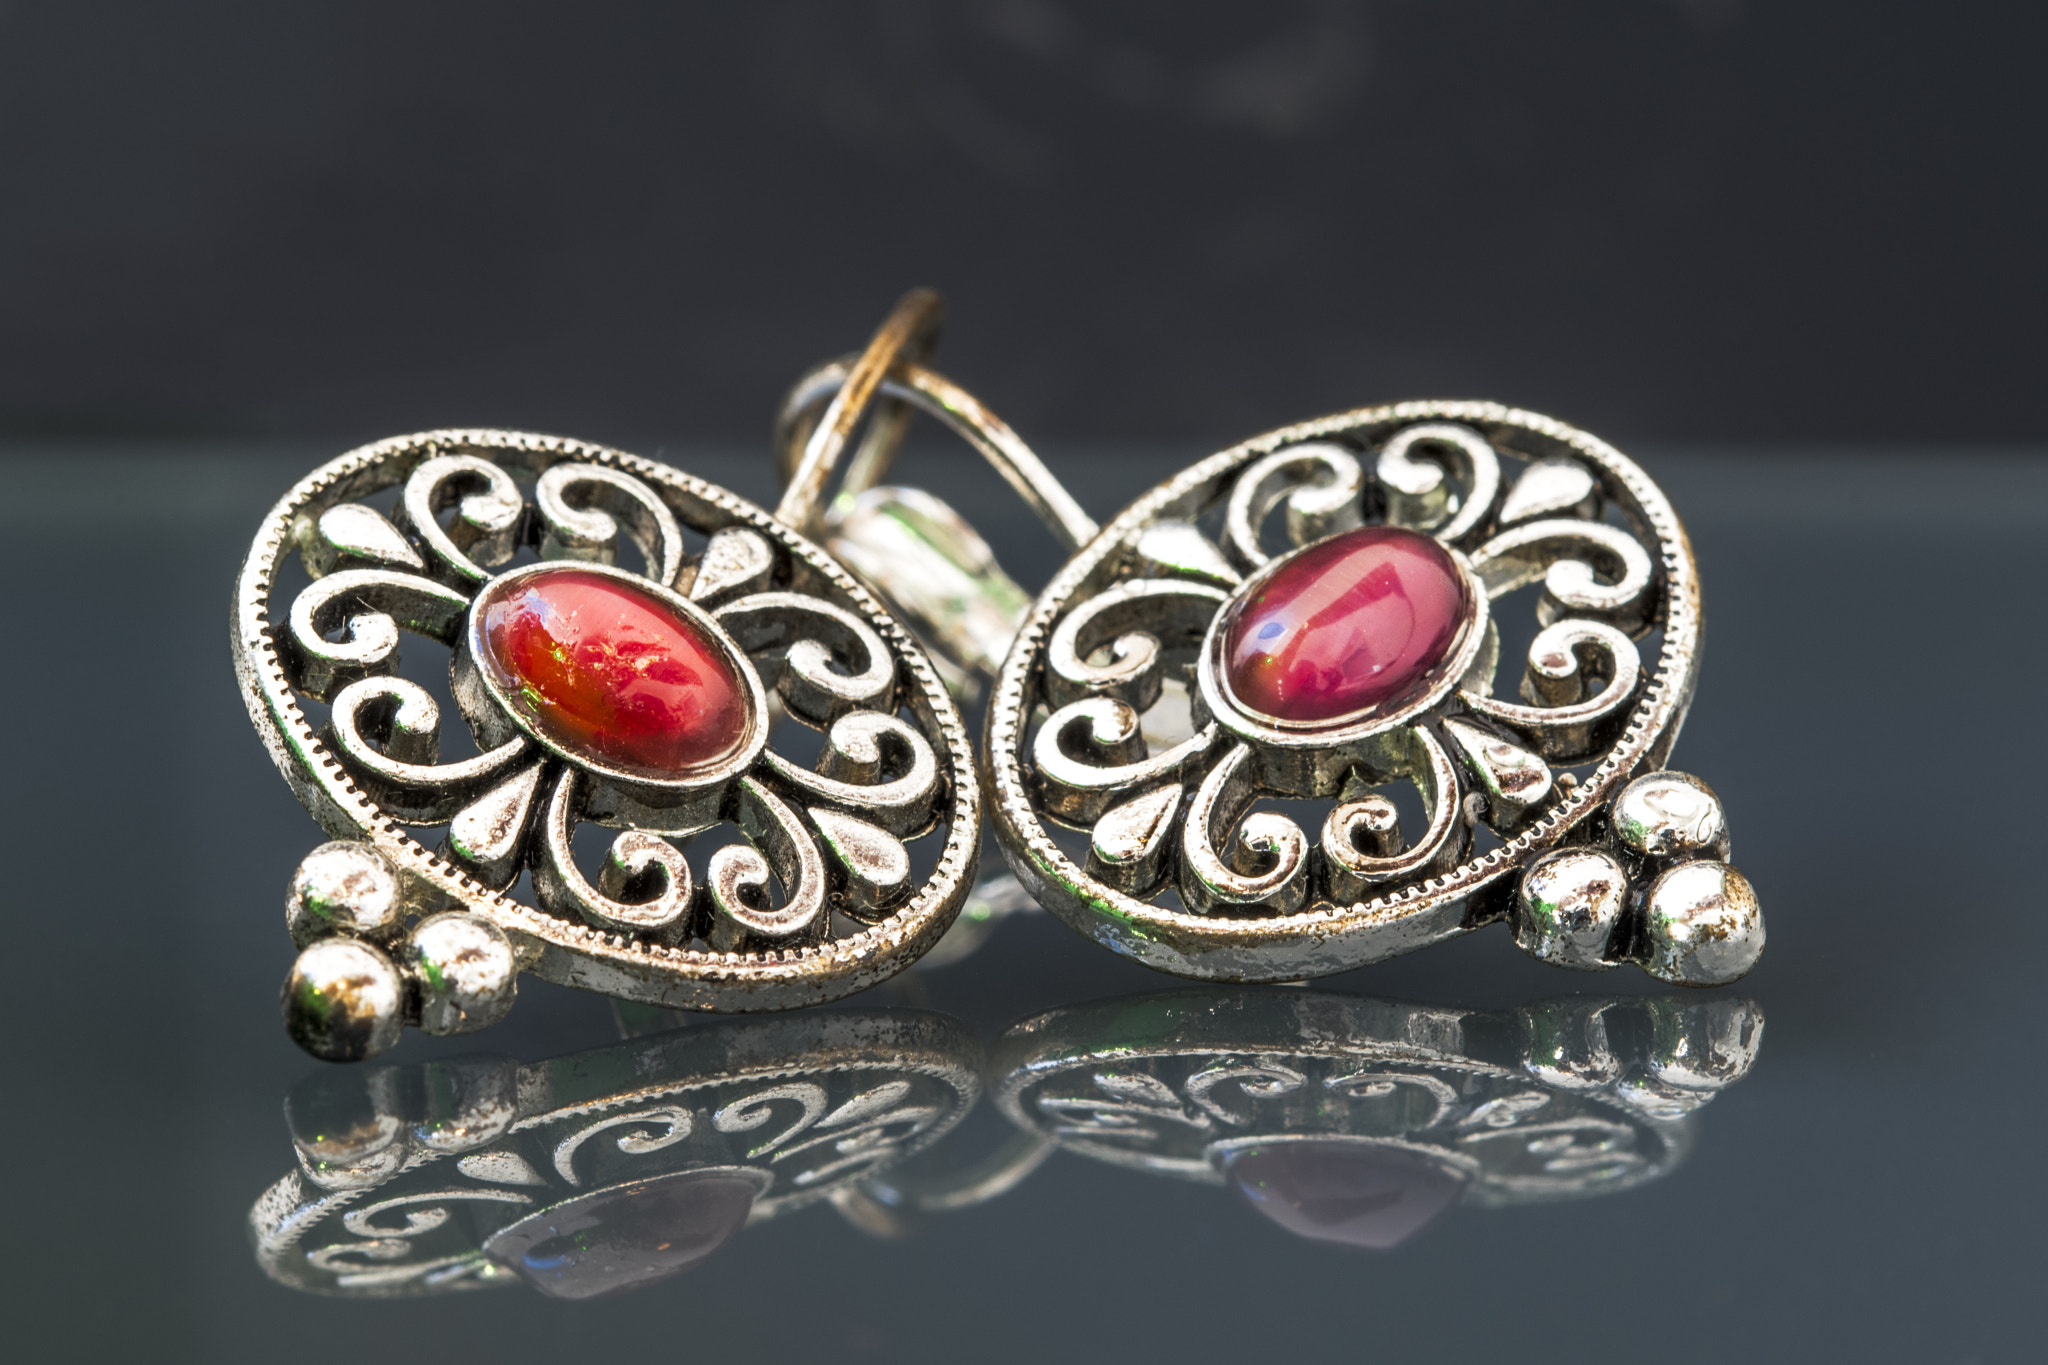 Nikon D500 sample photo. Silver earrings with red gems on dark background with reflection photography